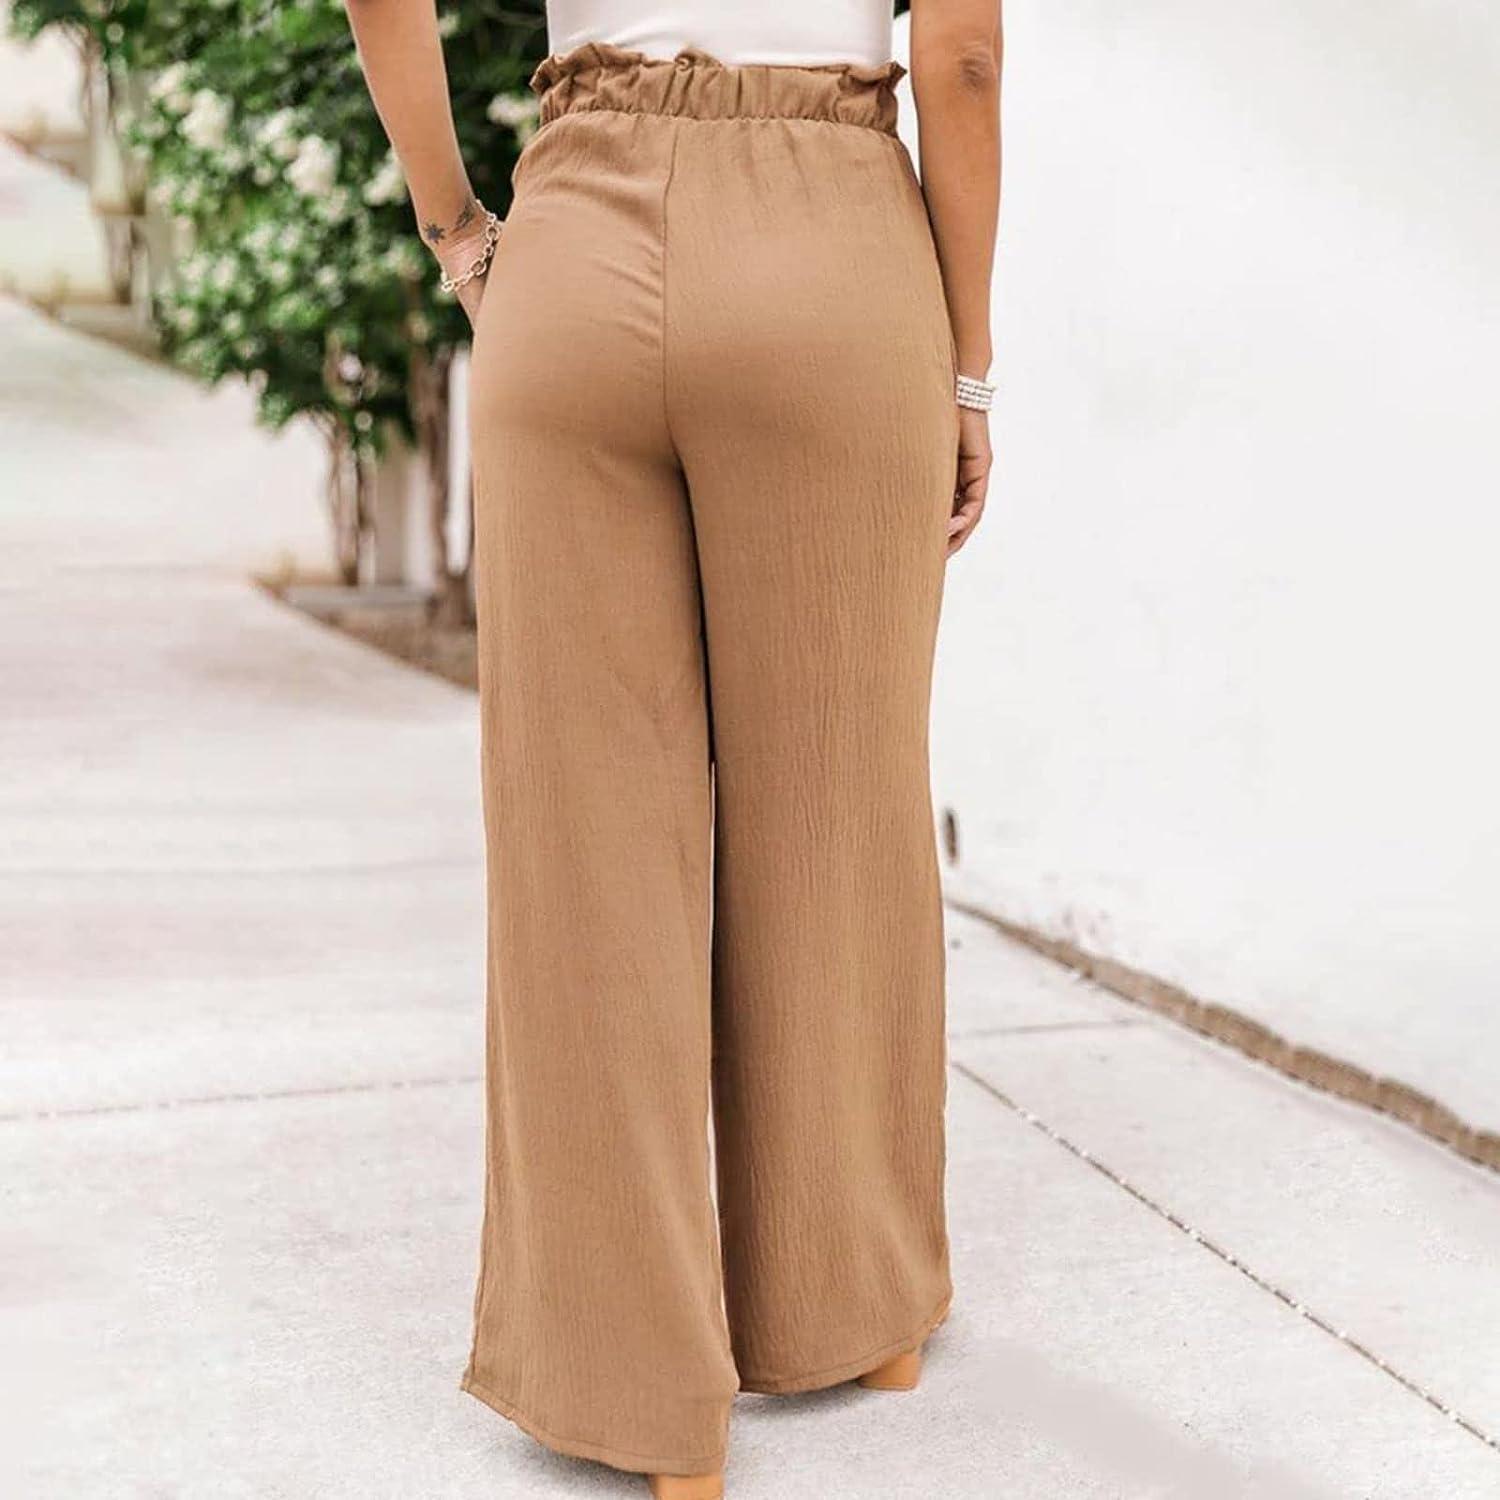 Boho Smocked Pants for Women Cotton Linen Pants Casual Printed Wide Leg  Drawstring Loose Elastic Waist Beach Trousers A-brown Small